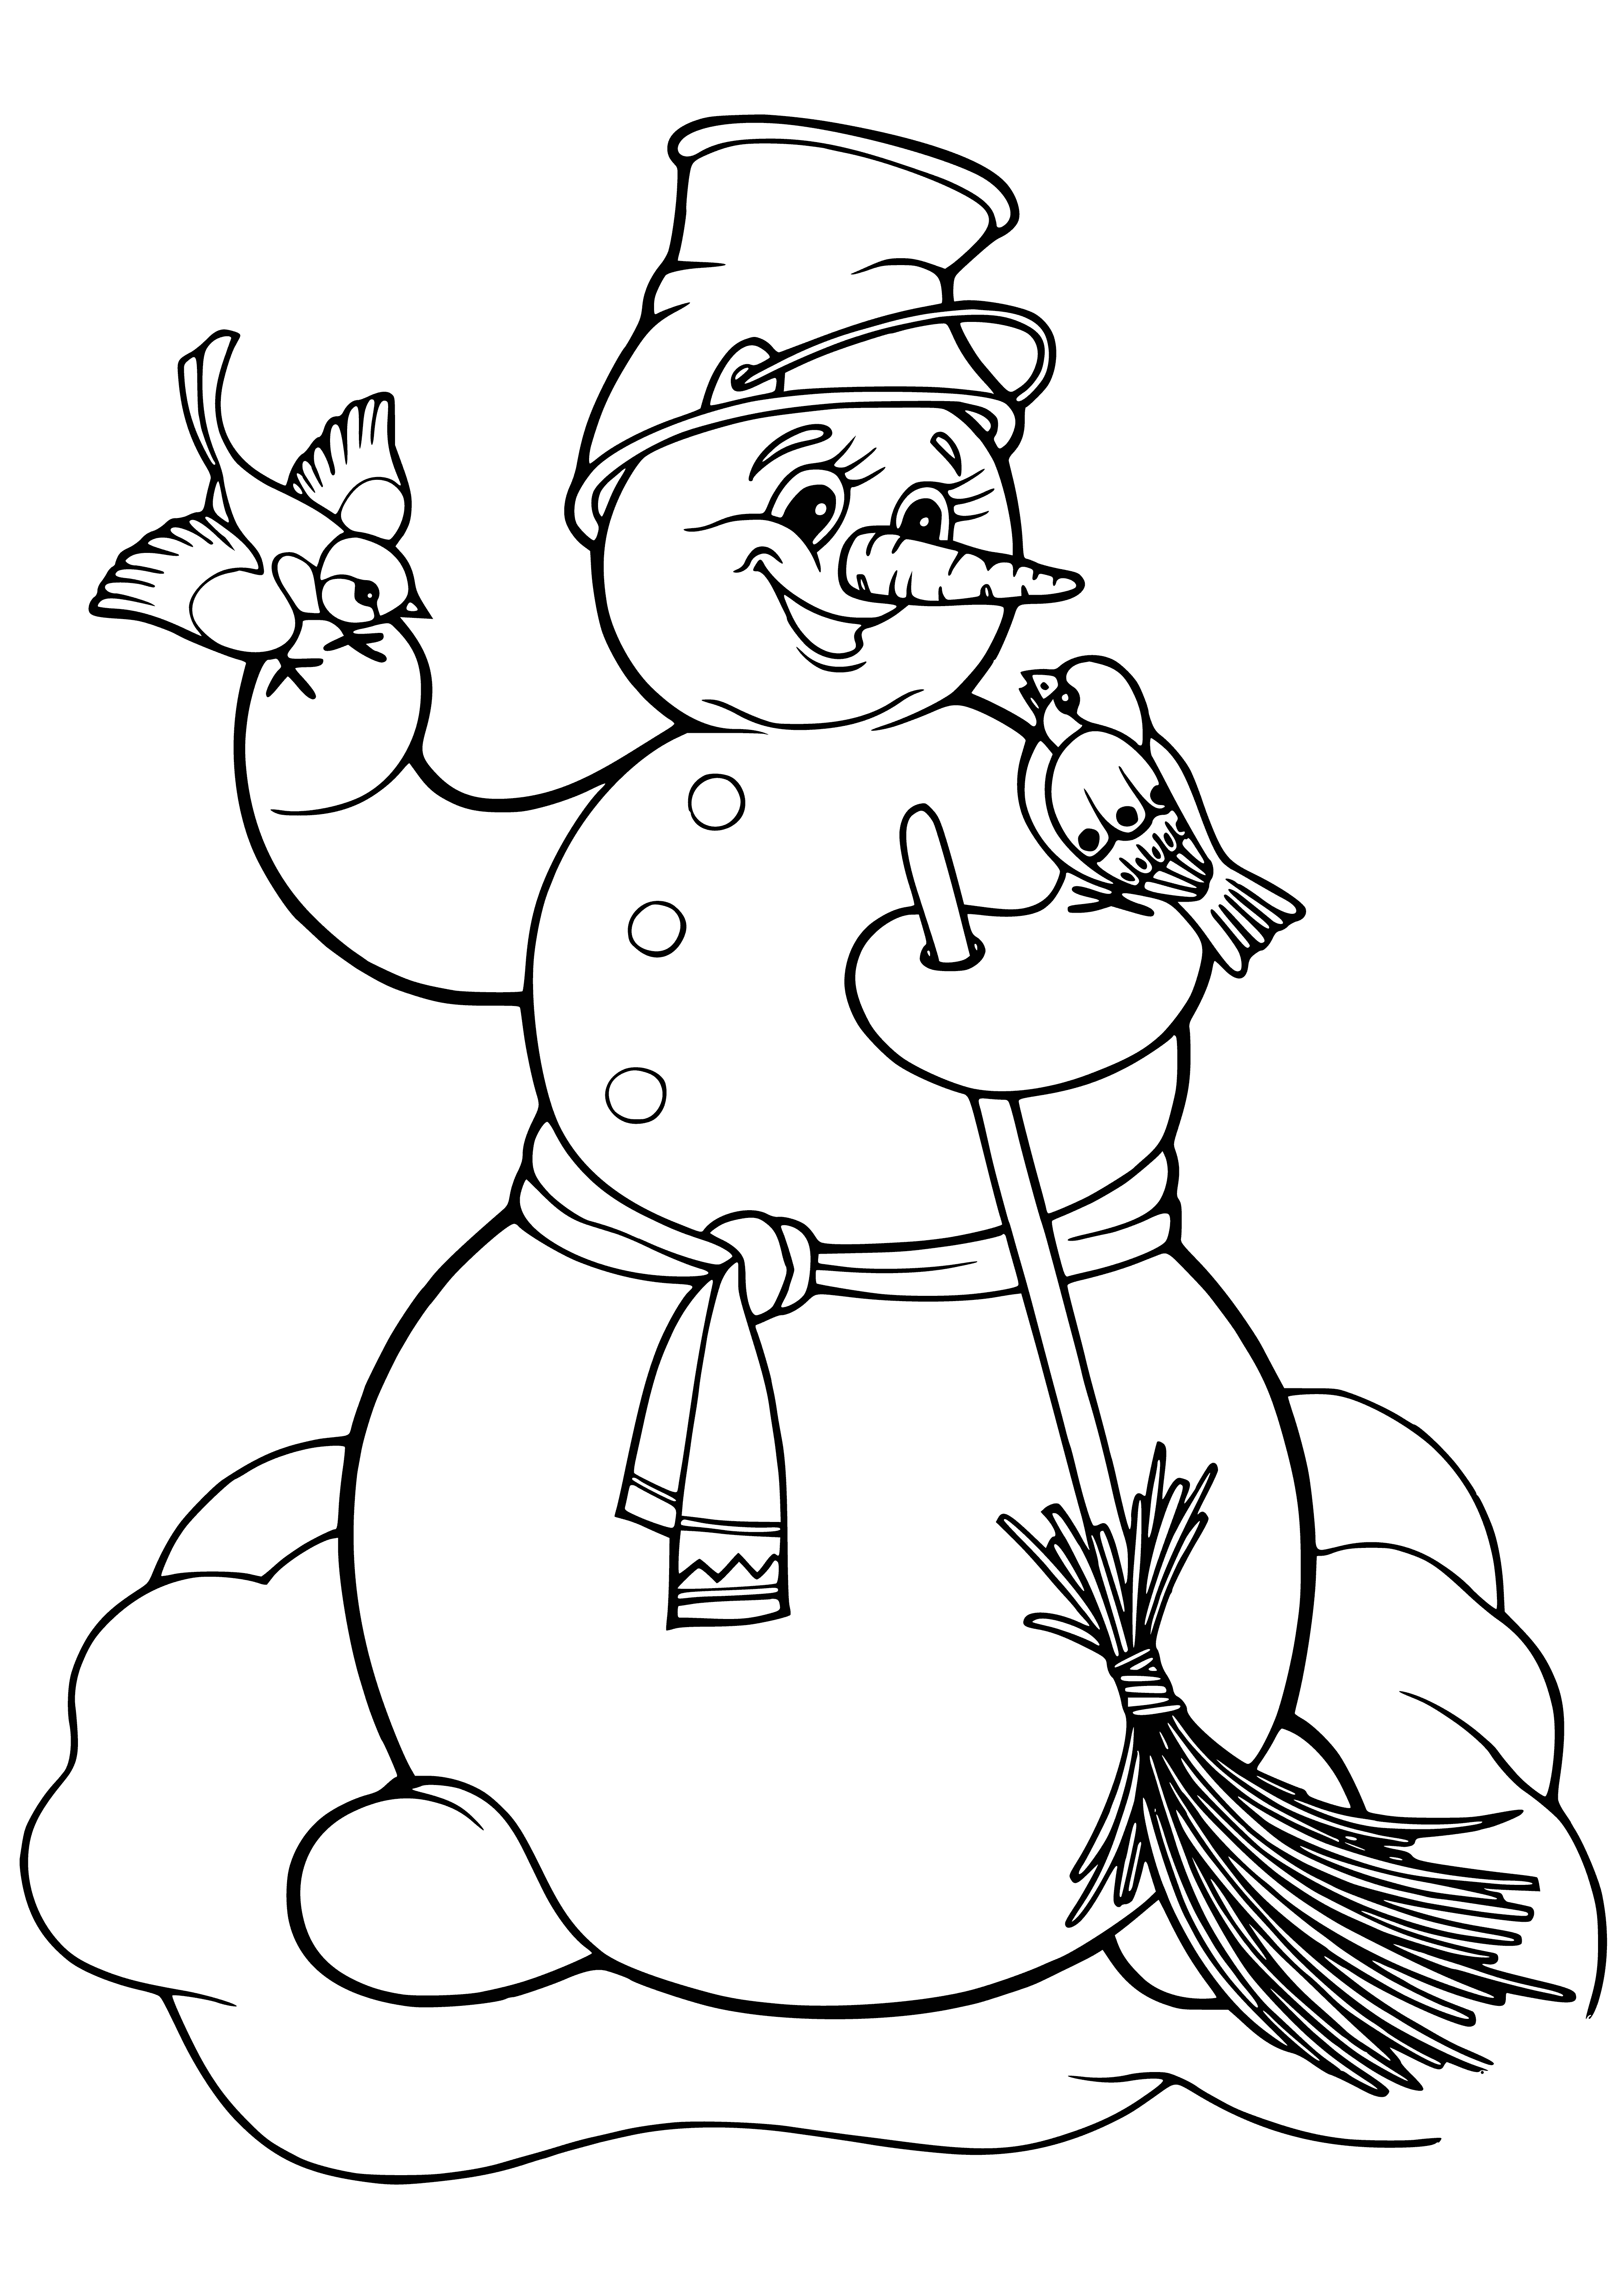 A snowman with carrot nose, coal eyes, scarf - a winter classic!